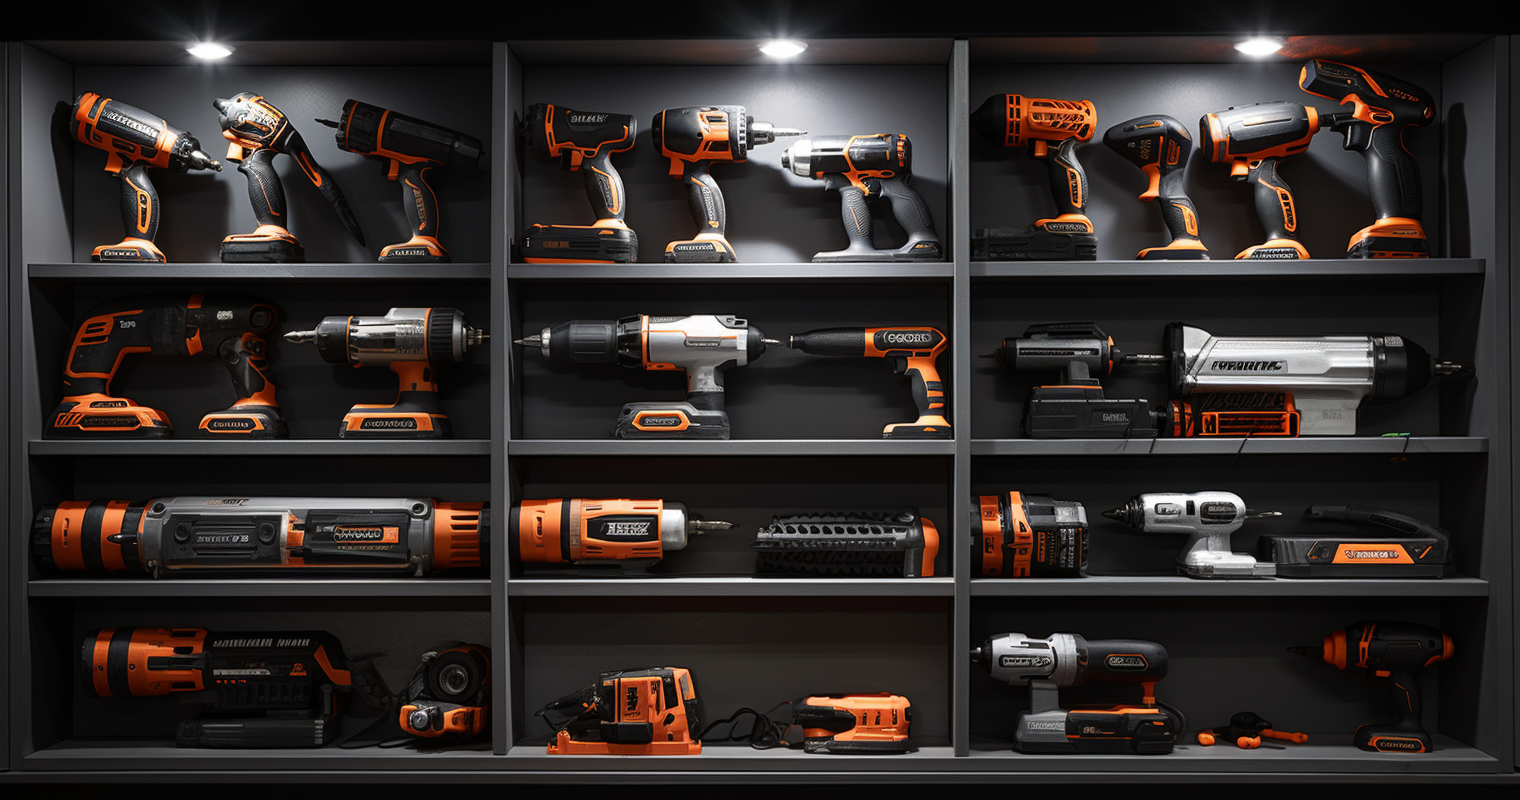 Who Sells Black And Decker Power Tools?